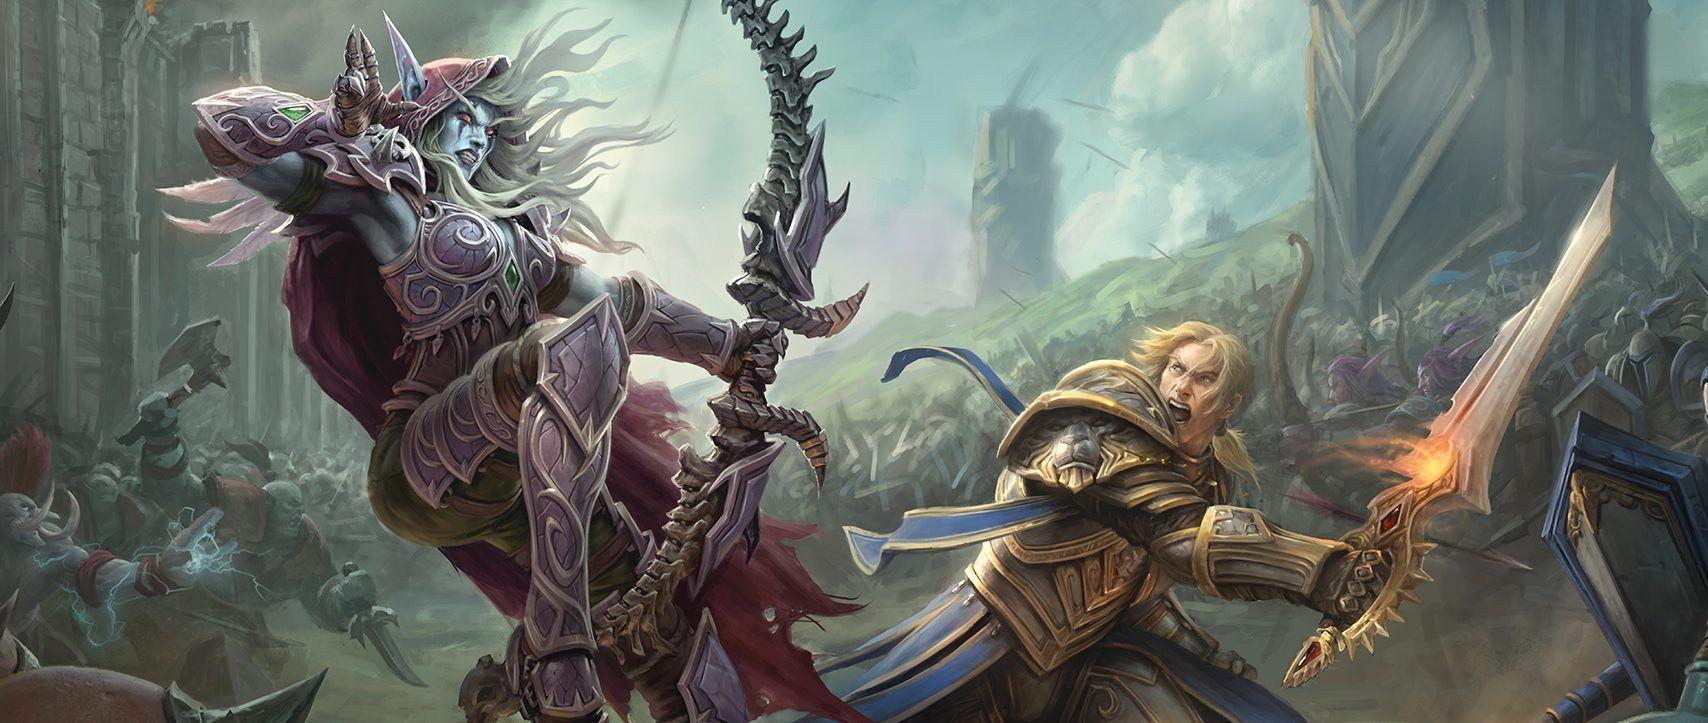 World of Warcraft: Battle for Azeroth HD Wallpaper and Background